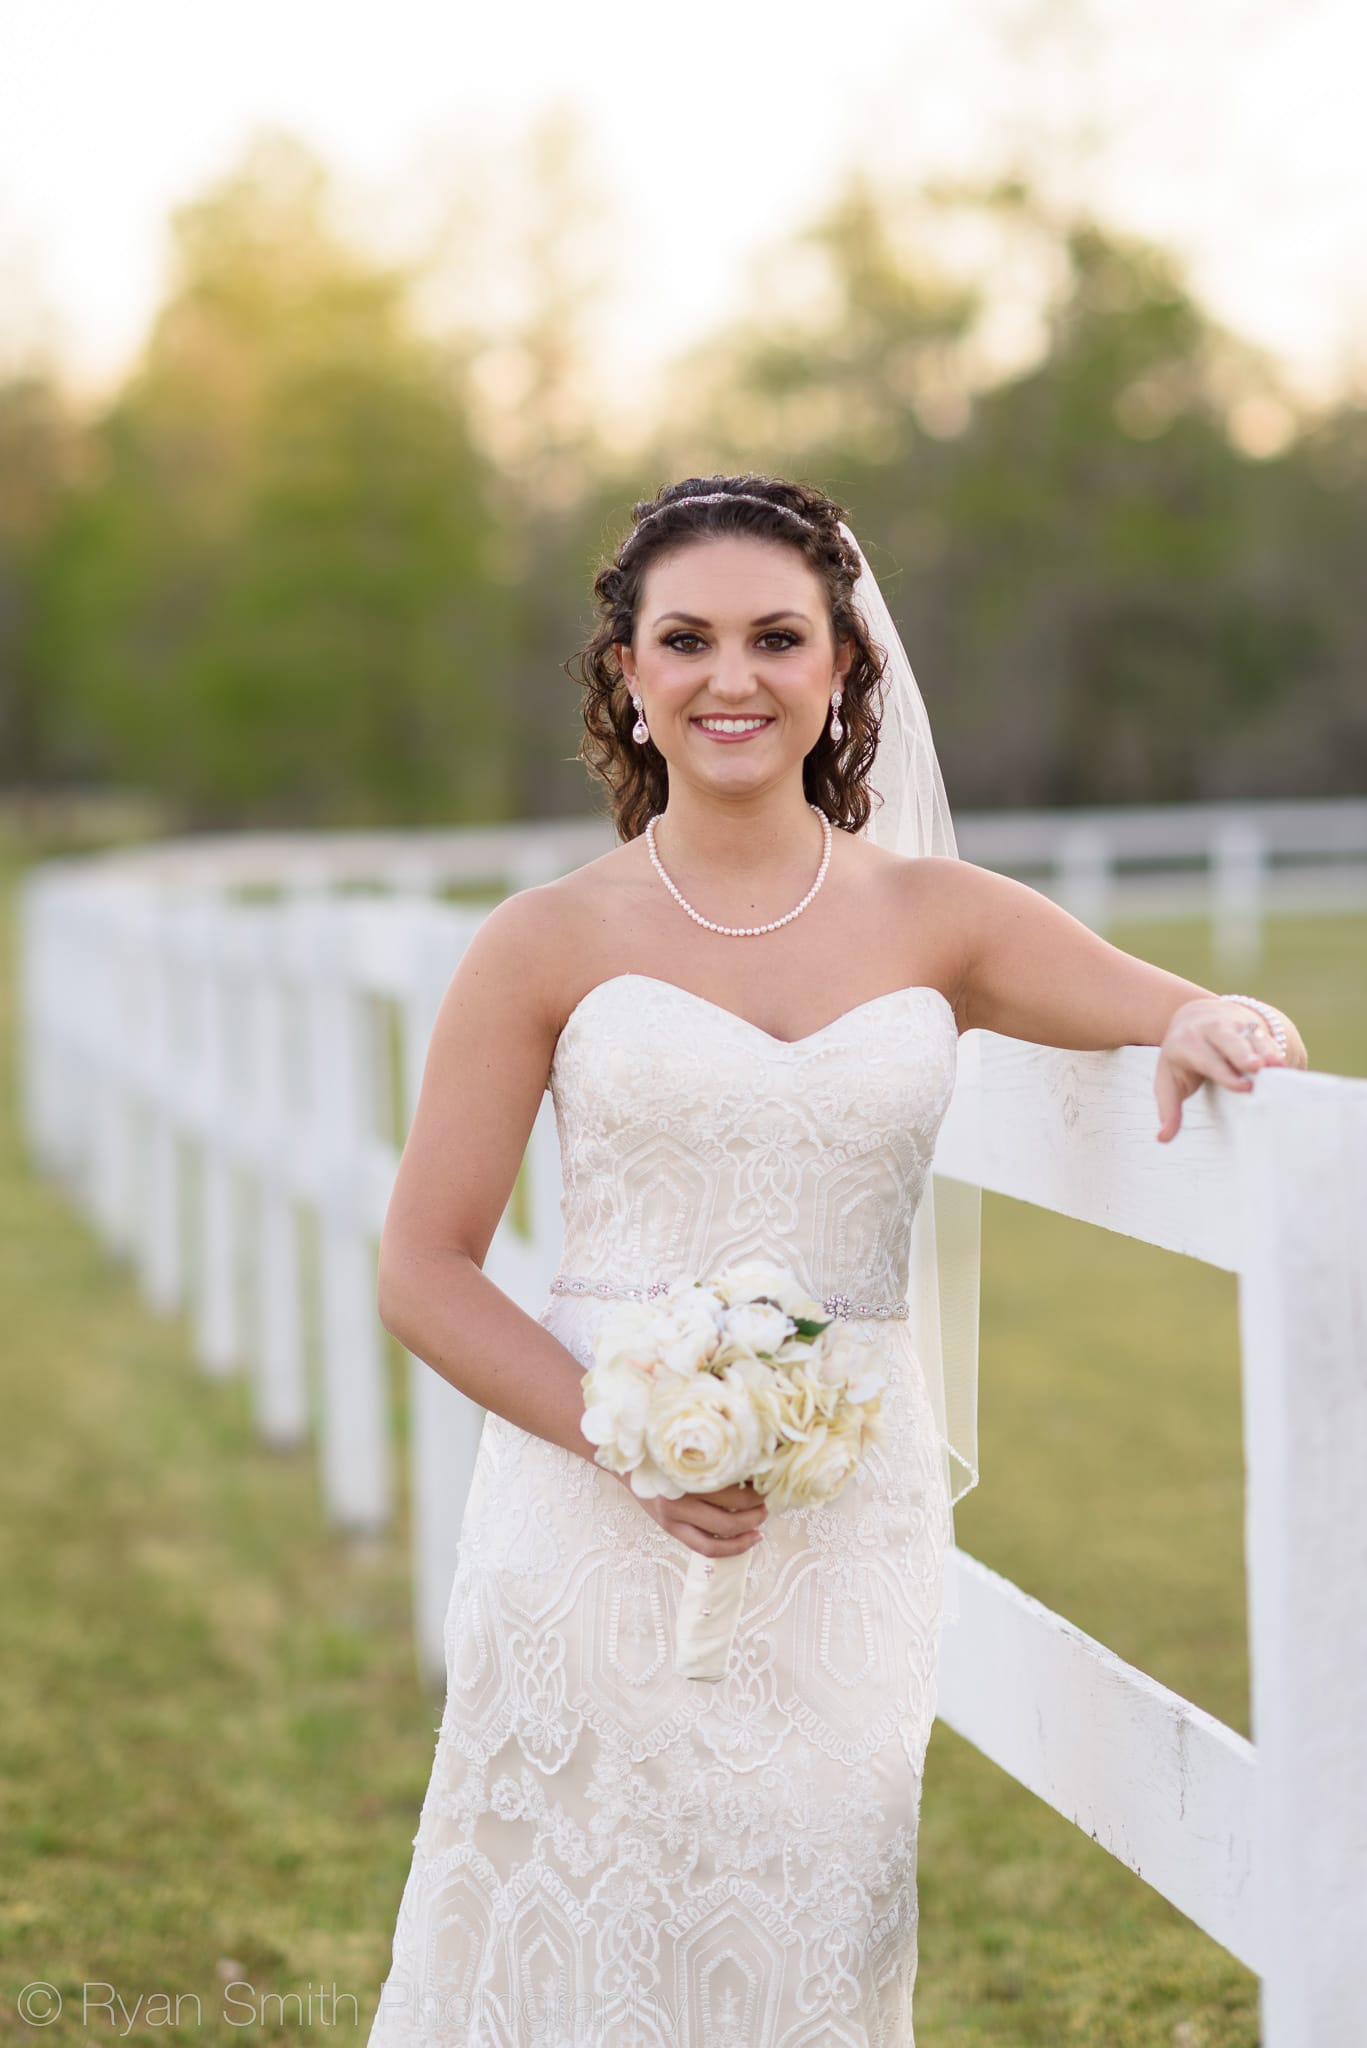 Bride with her arm on the white fence - Upper Mill Plantation